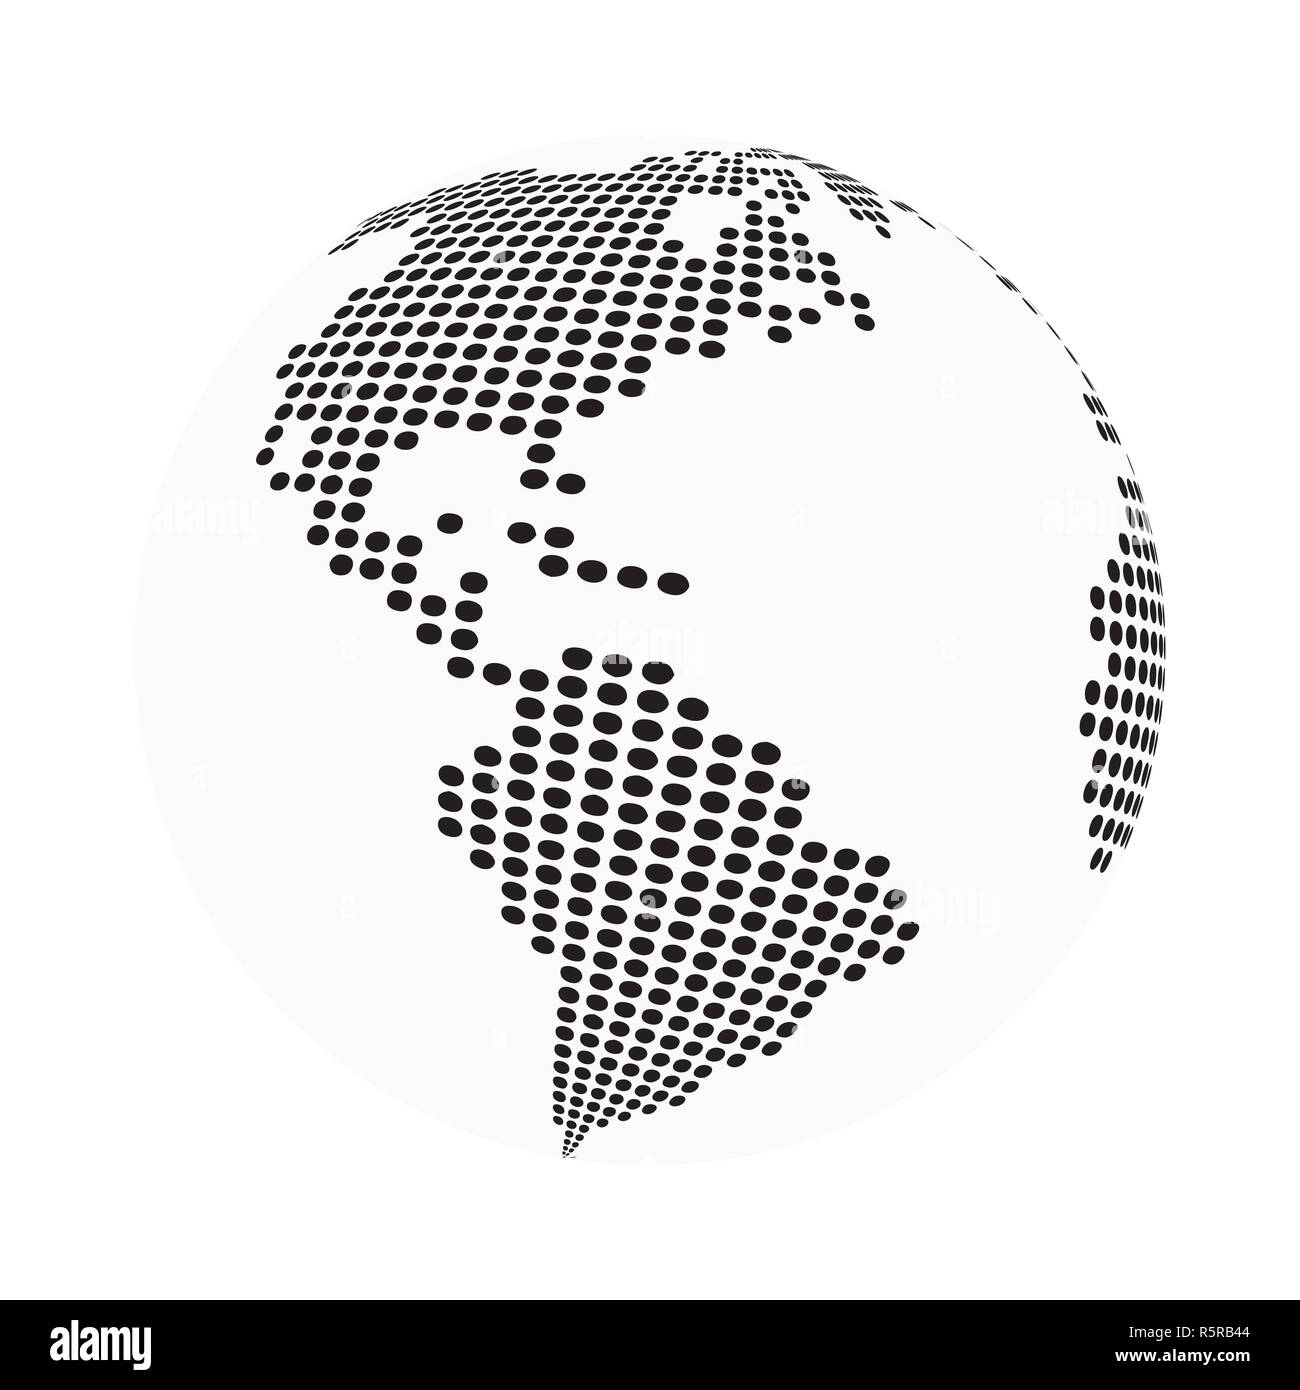 Globe Earth World Map Abstract Dotted Vector Background Black And White Silhouette Illustration Stock Photo Alamy